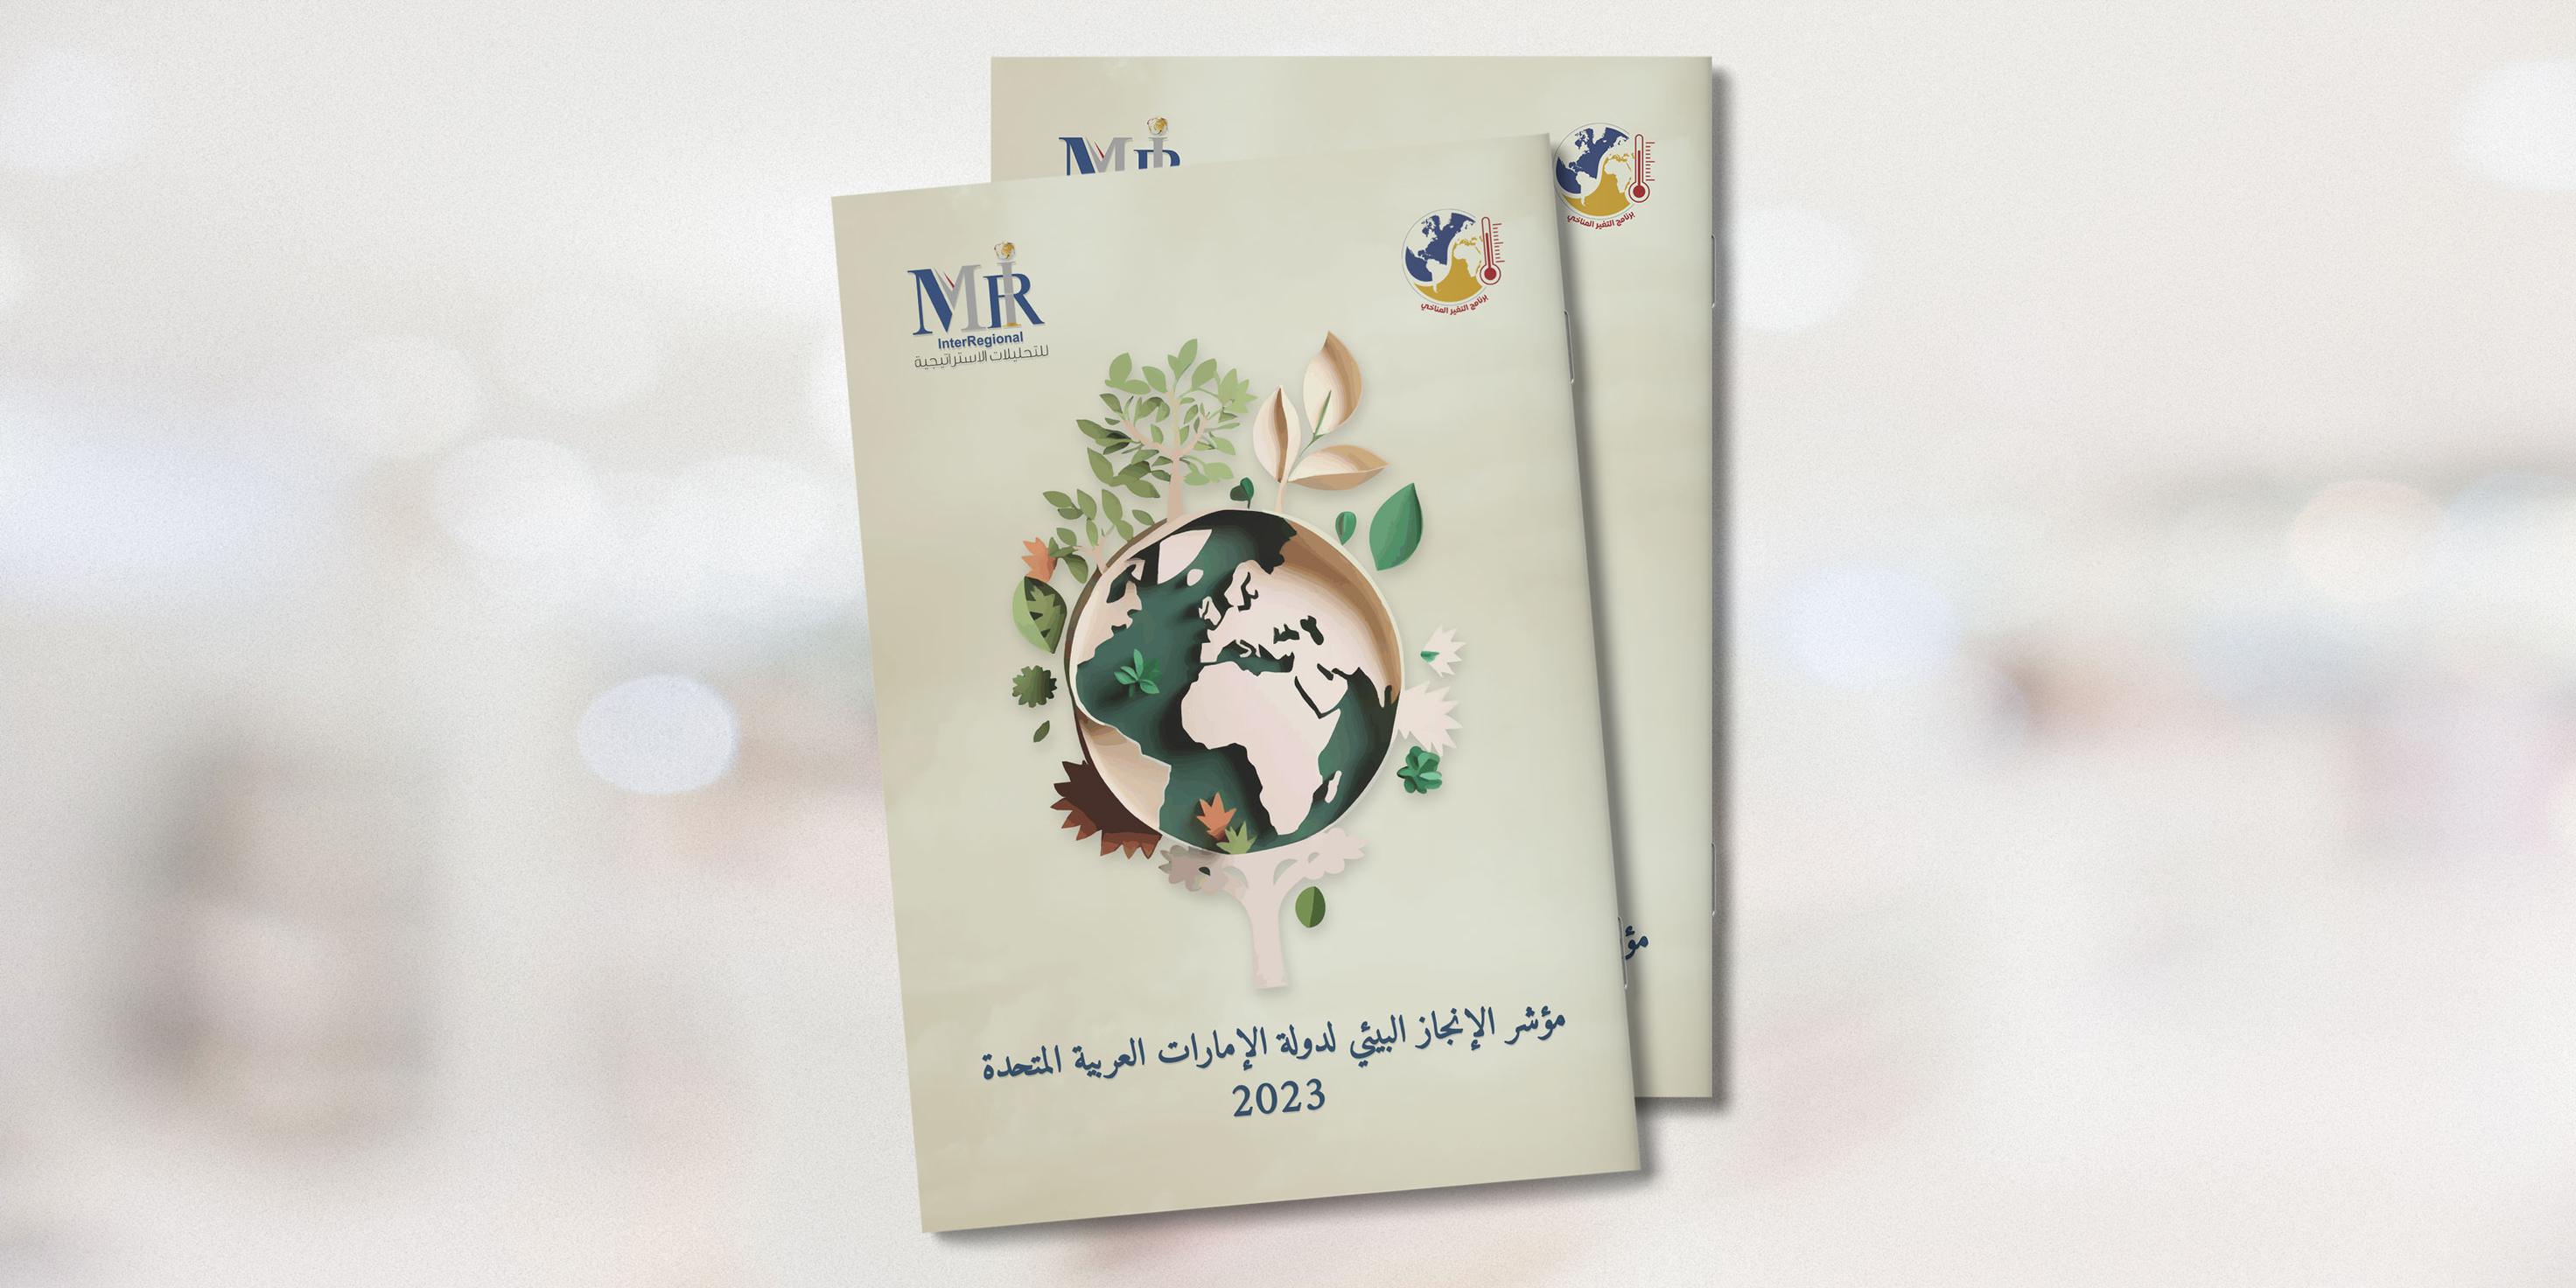 InterRegional Launches the First Issue of its UAE Environmental Achievement Index 2023